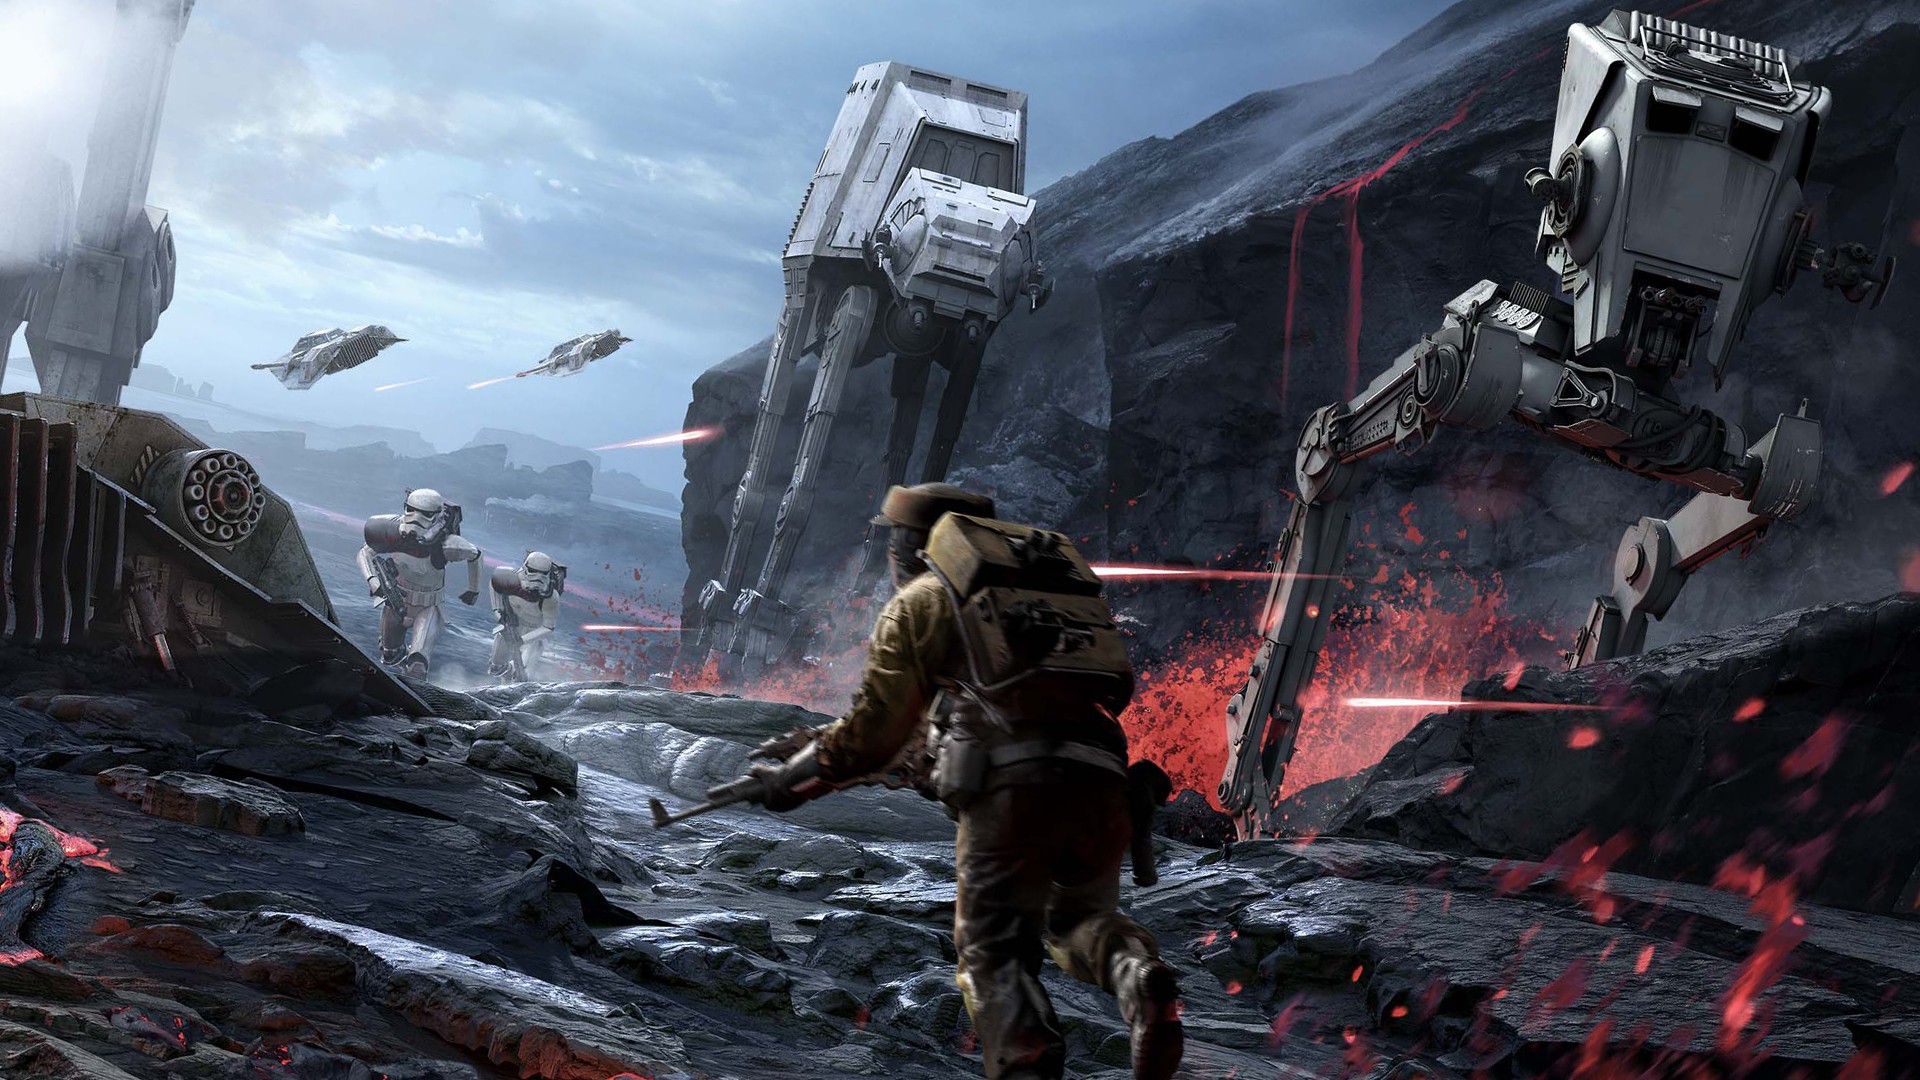 Star Wars Battlefront Px Full Hd Quality Images - Star Wars Phone Wallpaper  1080p - 1920x1080 Wallpaper 